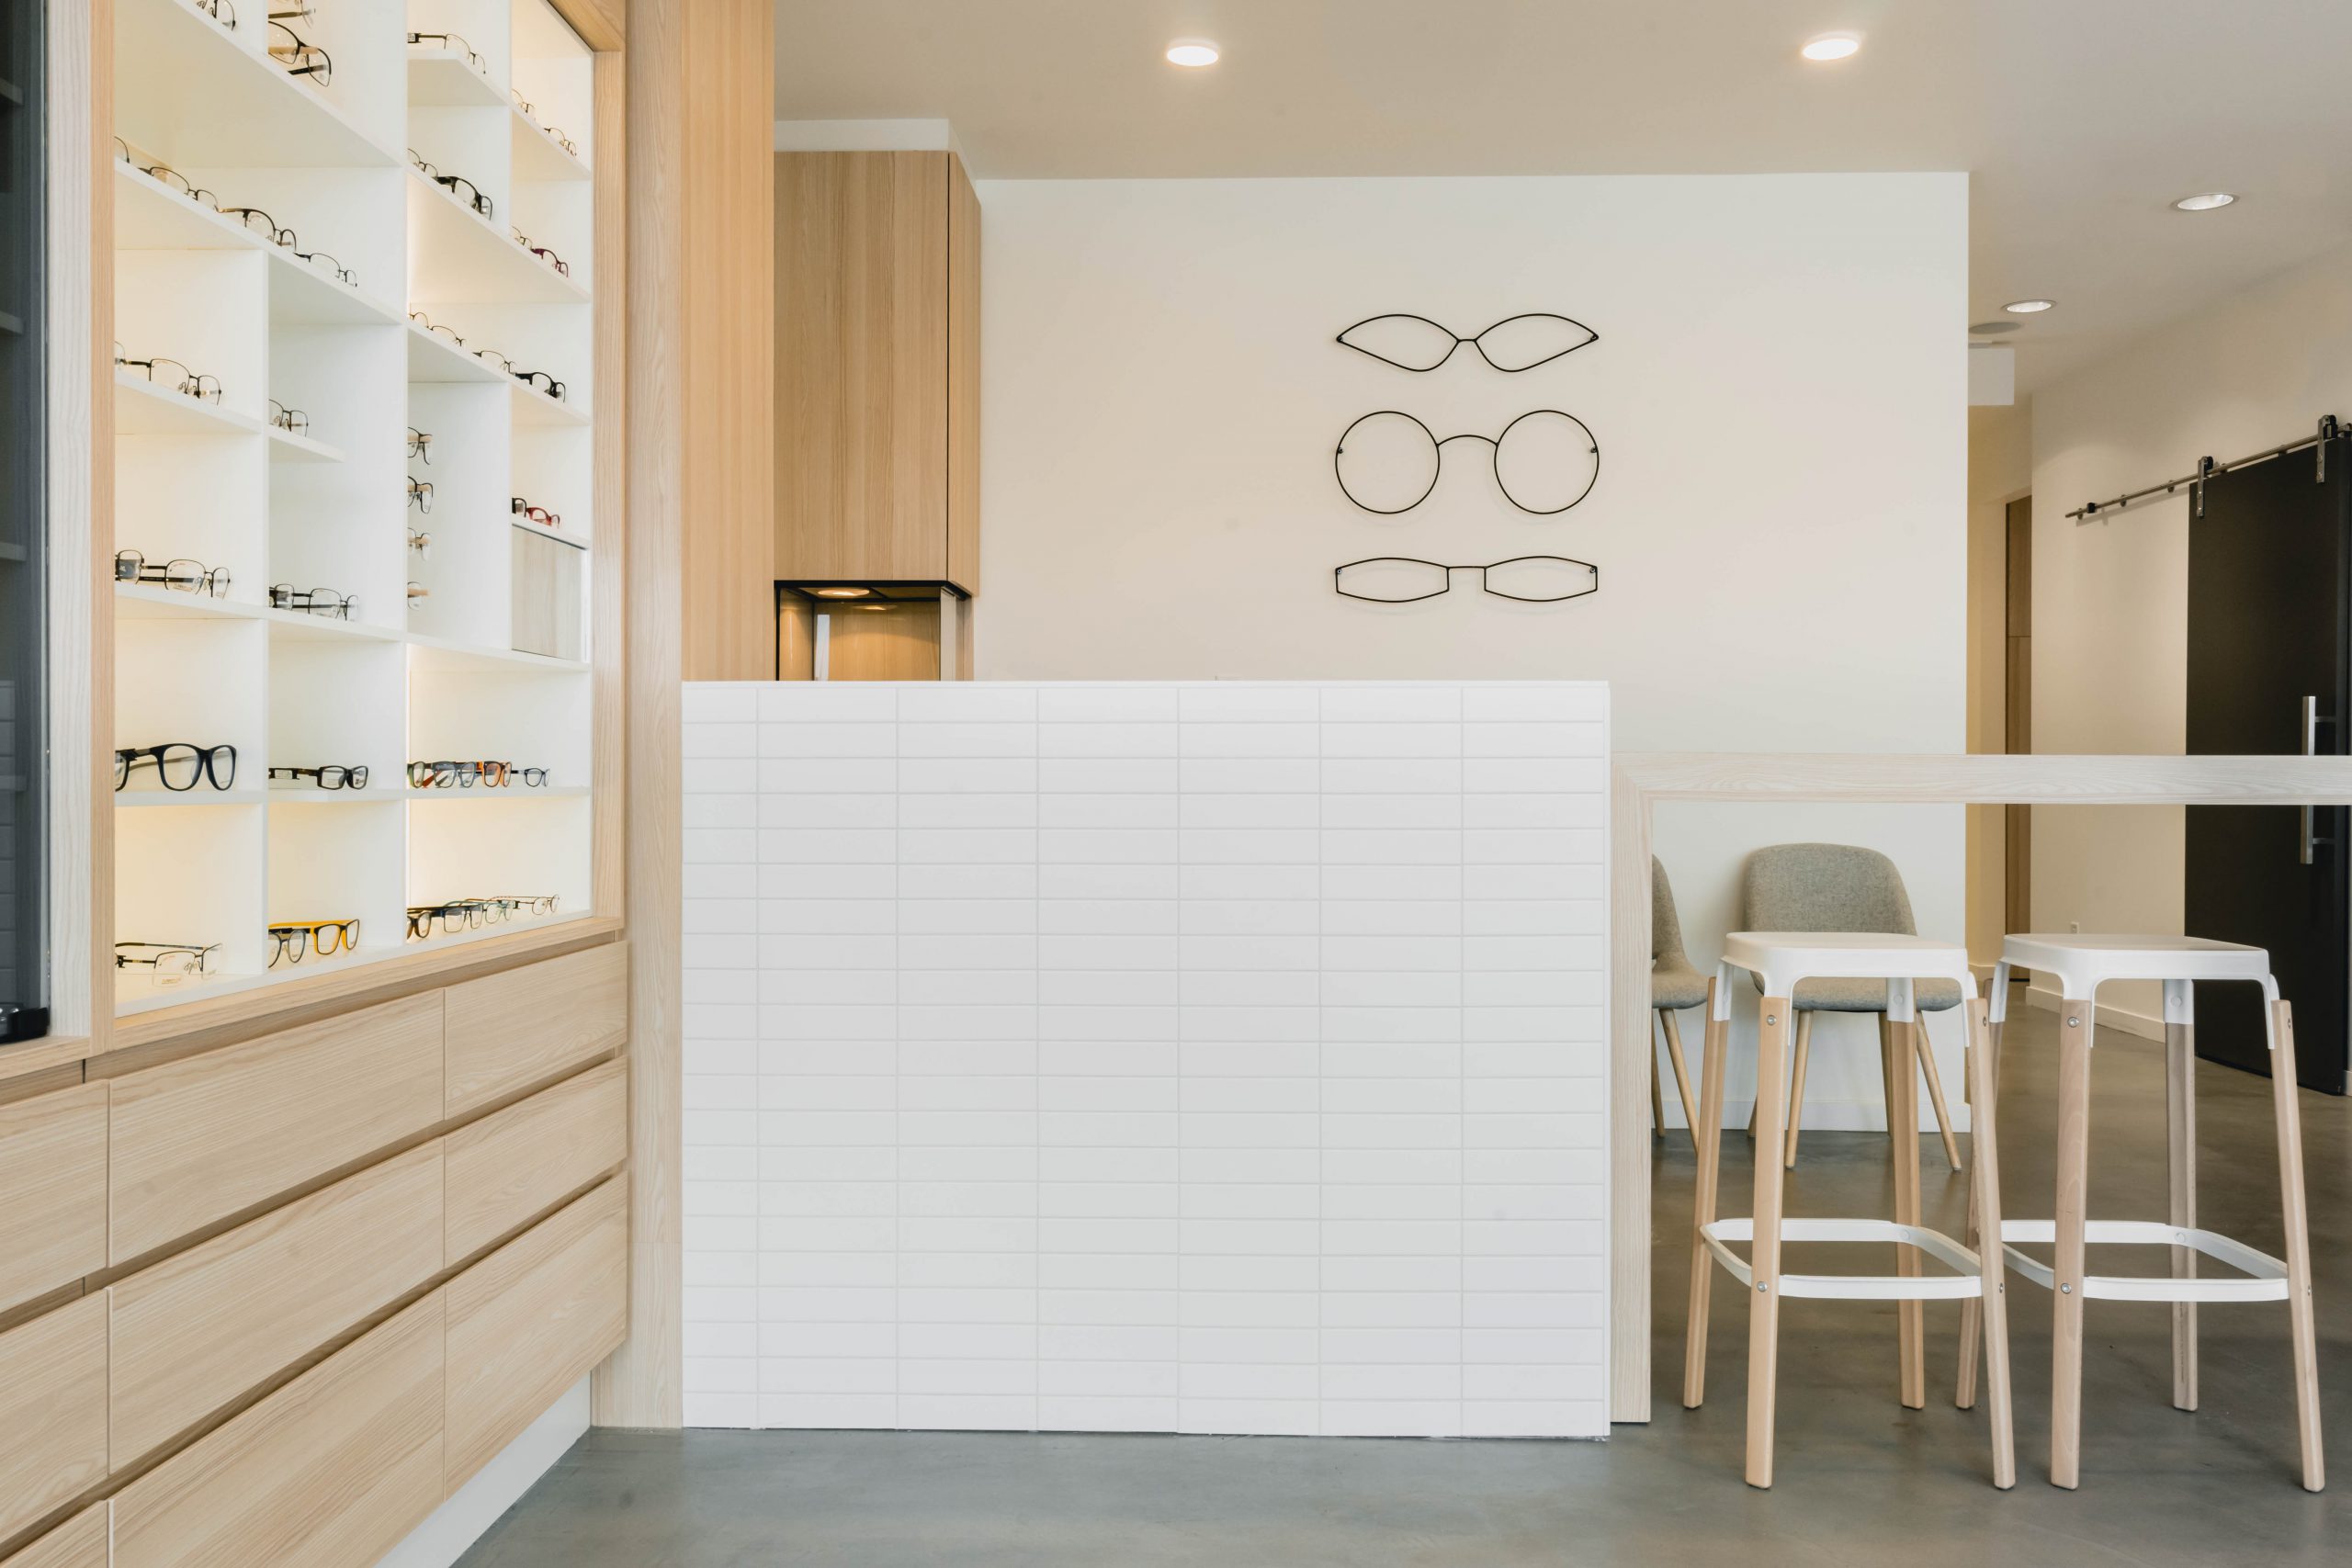 Desk and Stools, Retail Optometry Interior Design, Boardwalk Optometry in Surrey BC, by Cutler